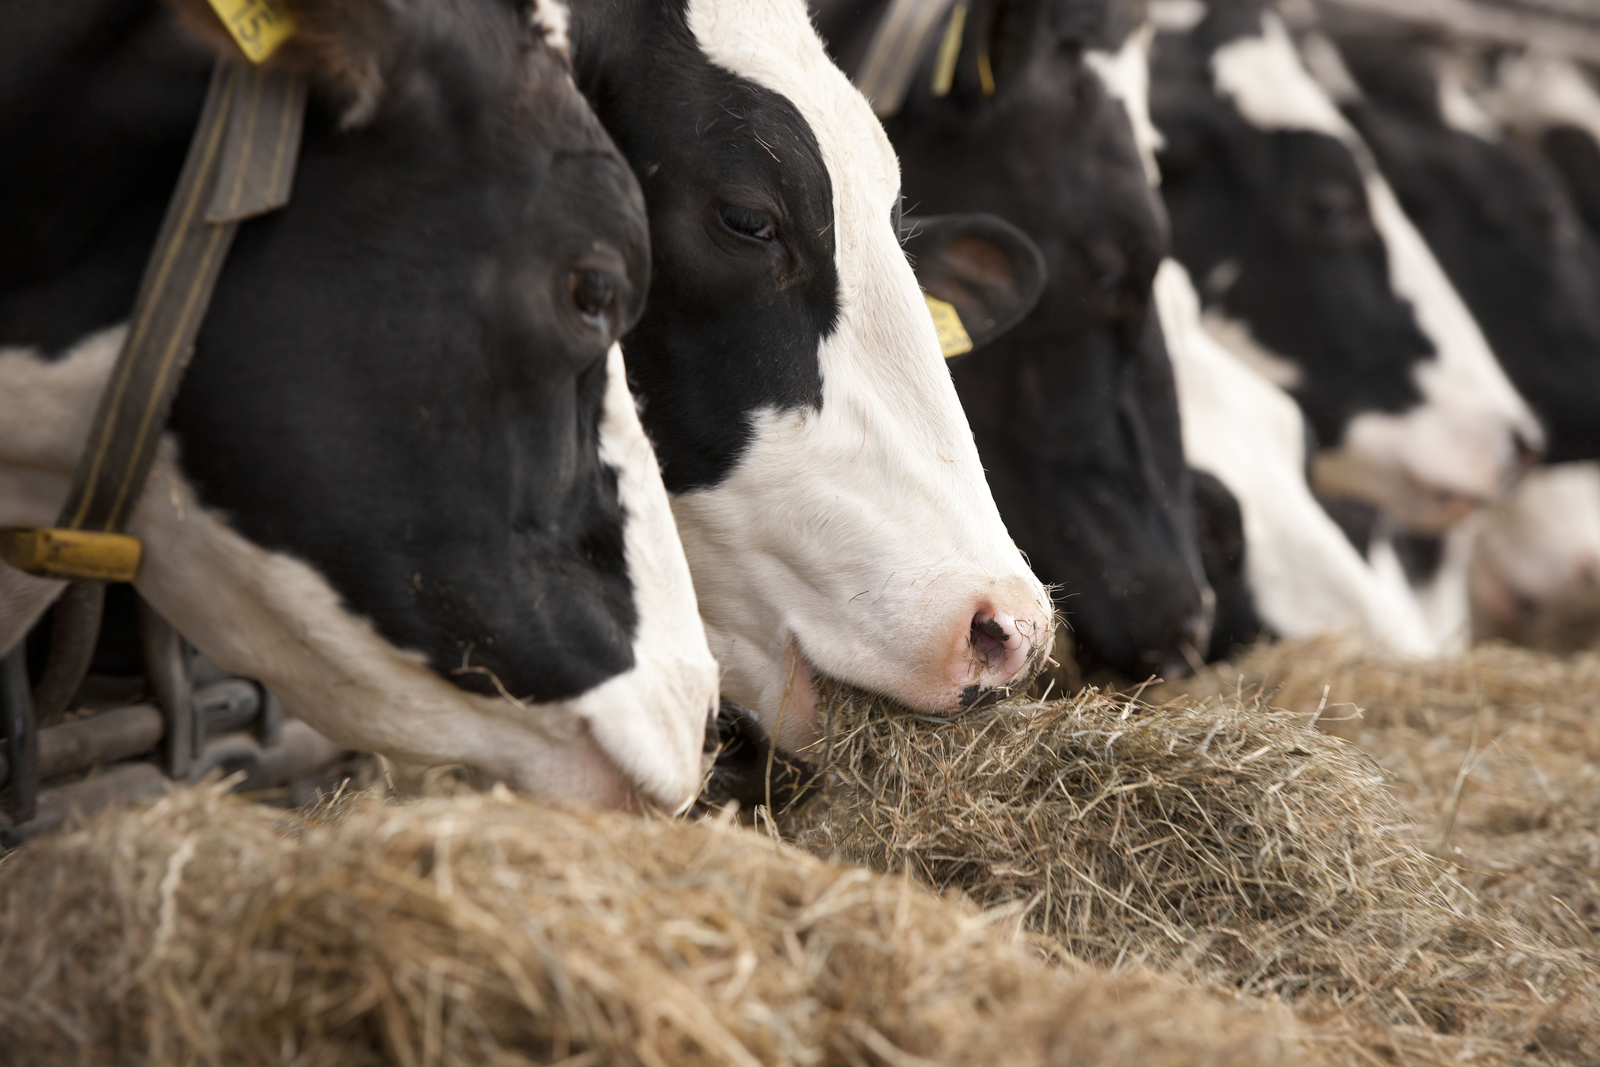 High-yielding dairy cows have particularly high methionine requirements.